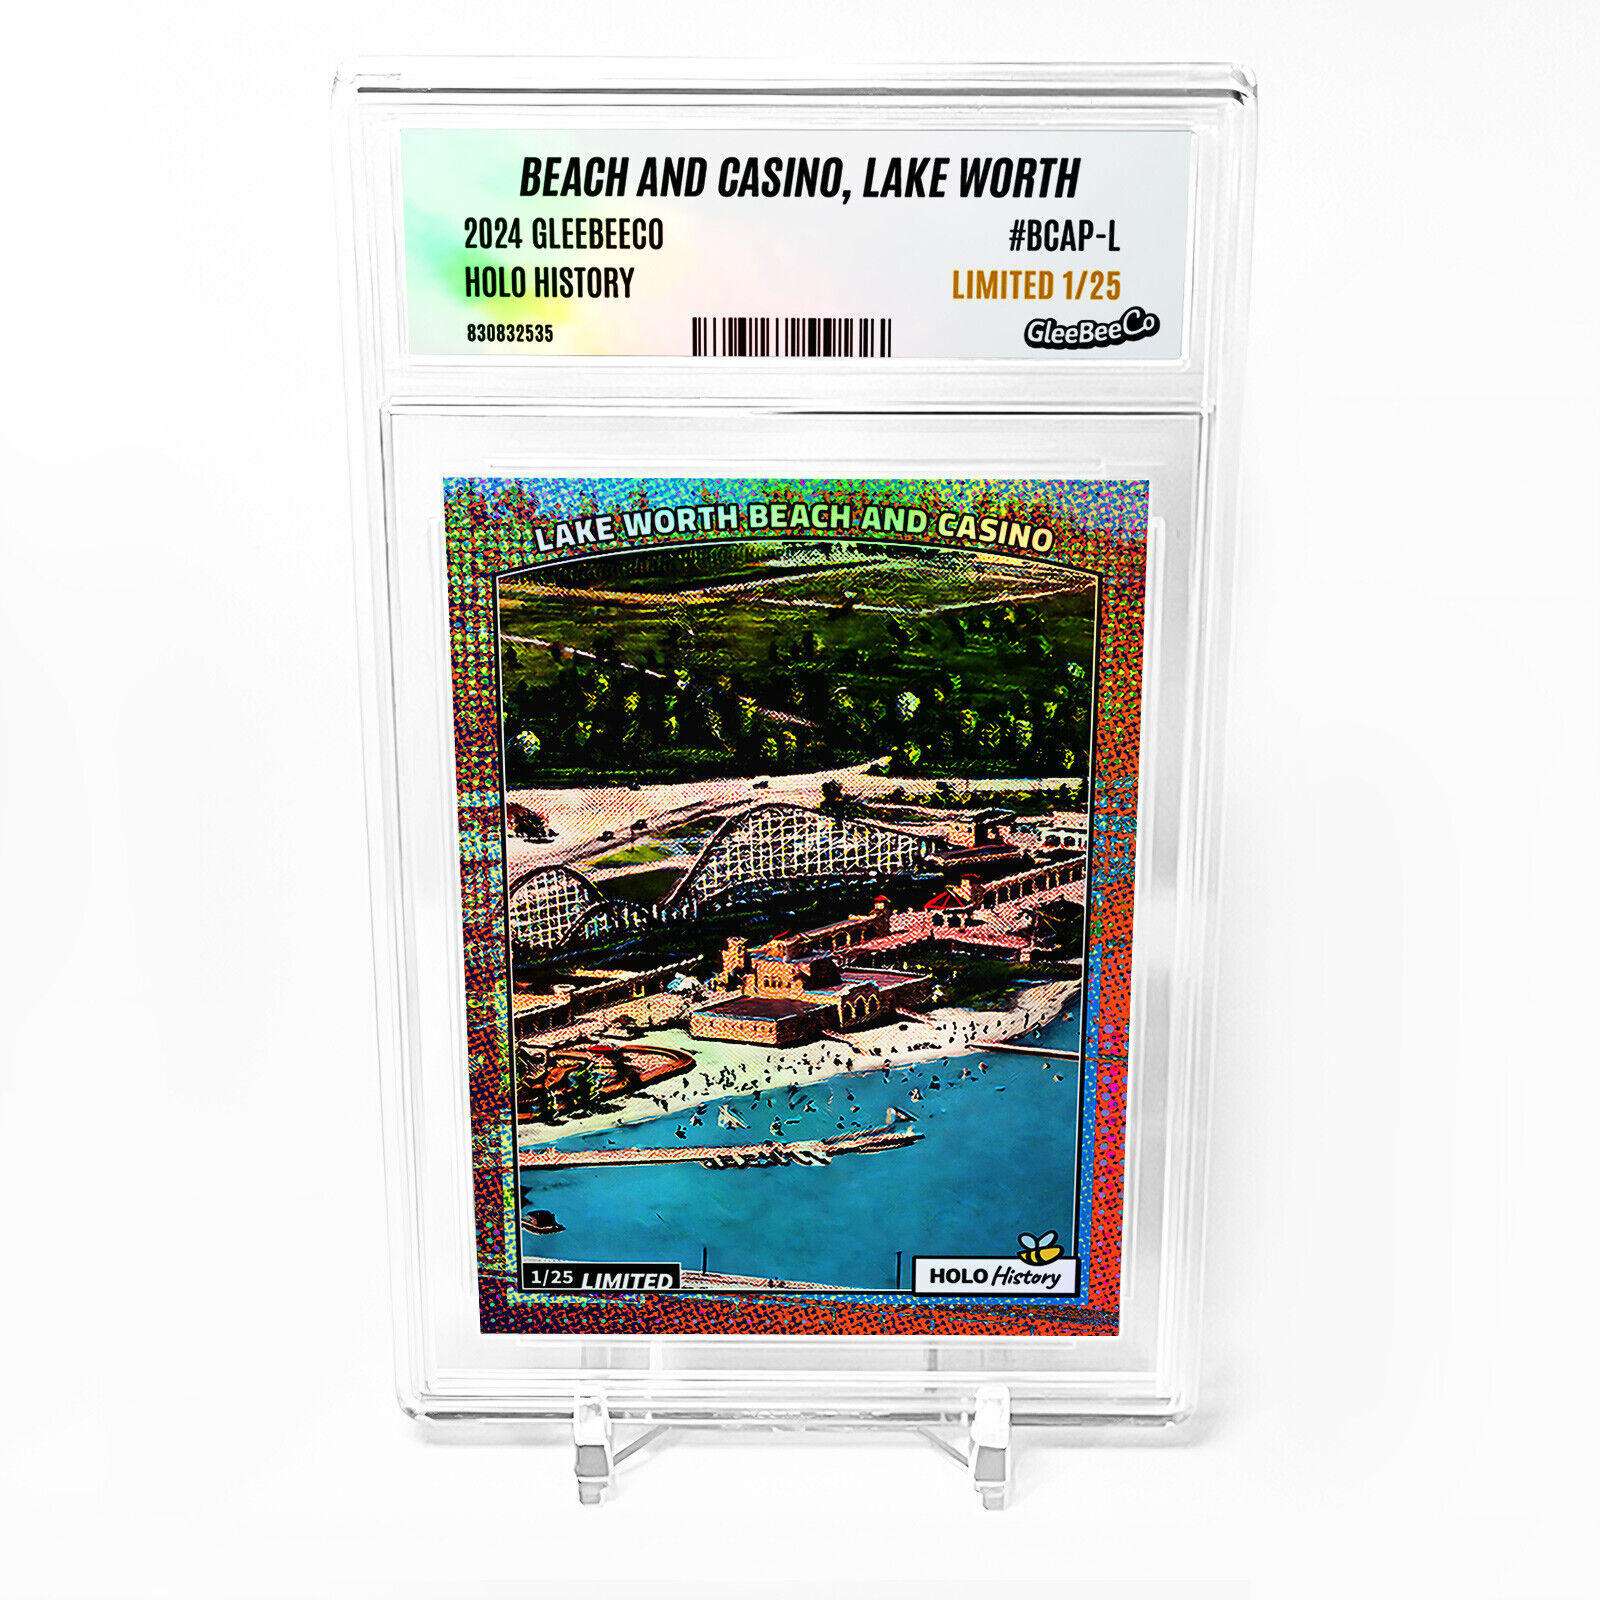 BEACH AND CASINO, LAKE WORTH, FORT WORTH Card 2024 GleeBeeCo Holo #BCAP-L /25